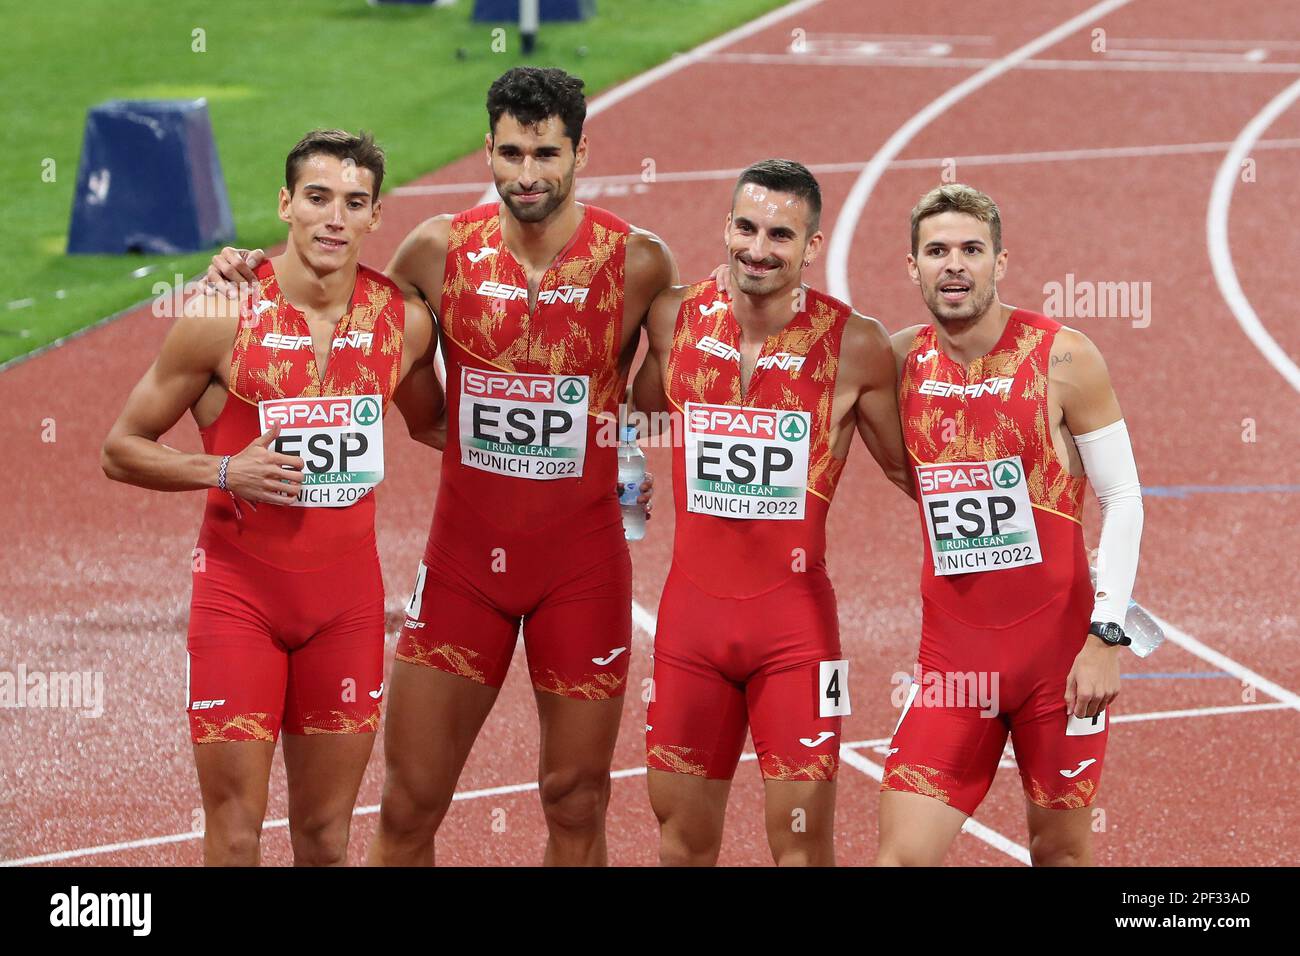 The Men's Spanish 4 * 400m Relay Team after setting a National Record  at the European Athletics Championship 2022 Stock Photo